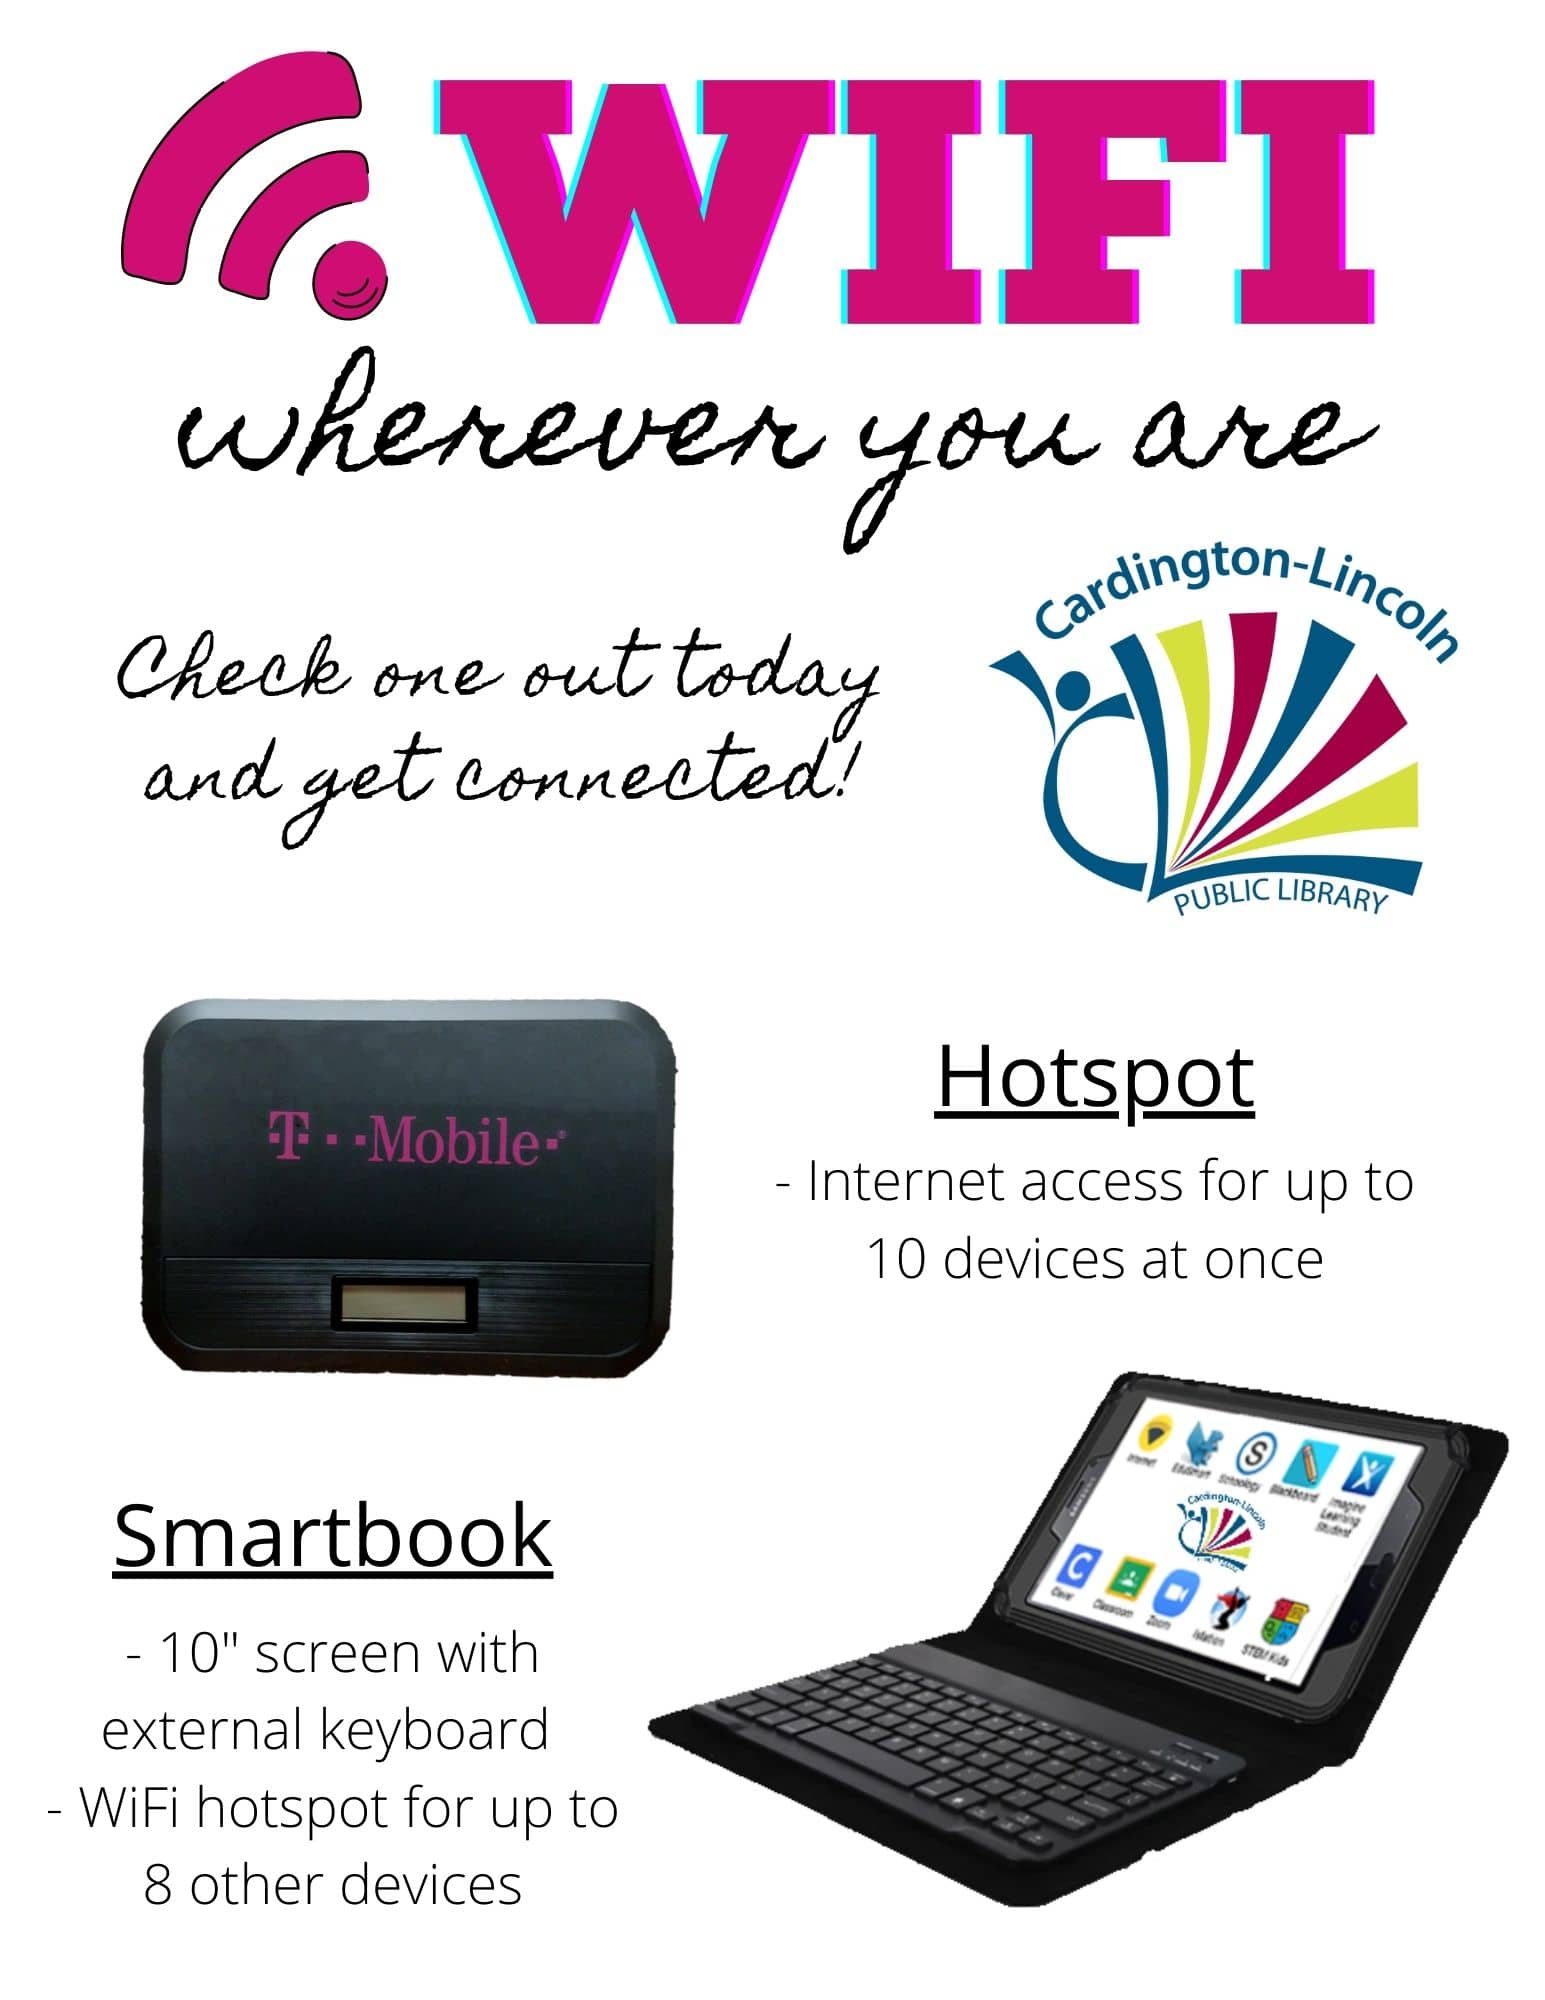 WiFi wherever you are, check one out today and get connected; hotspots provide internet access for up to 10 devices, smartbooks have an external keyboard and serve as wifi hotspot for up to 8 devices.